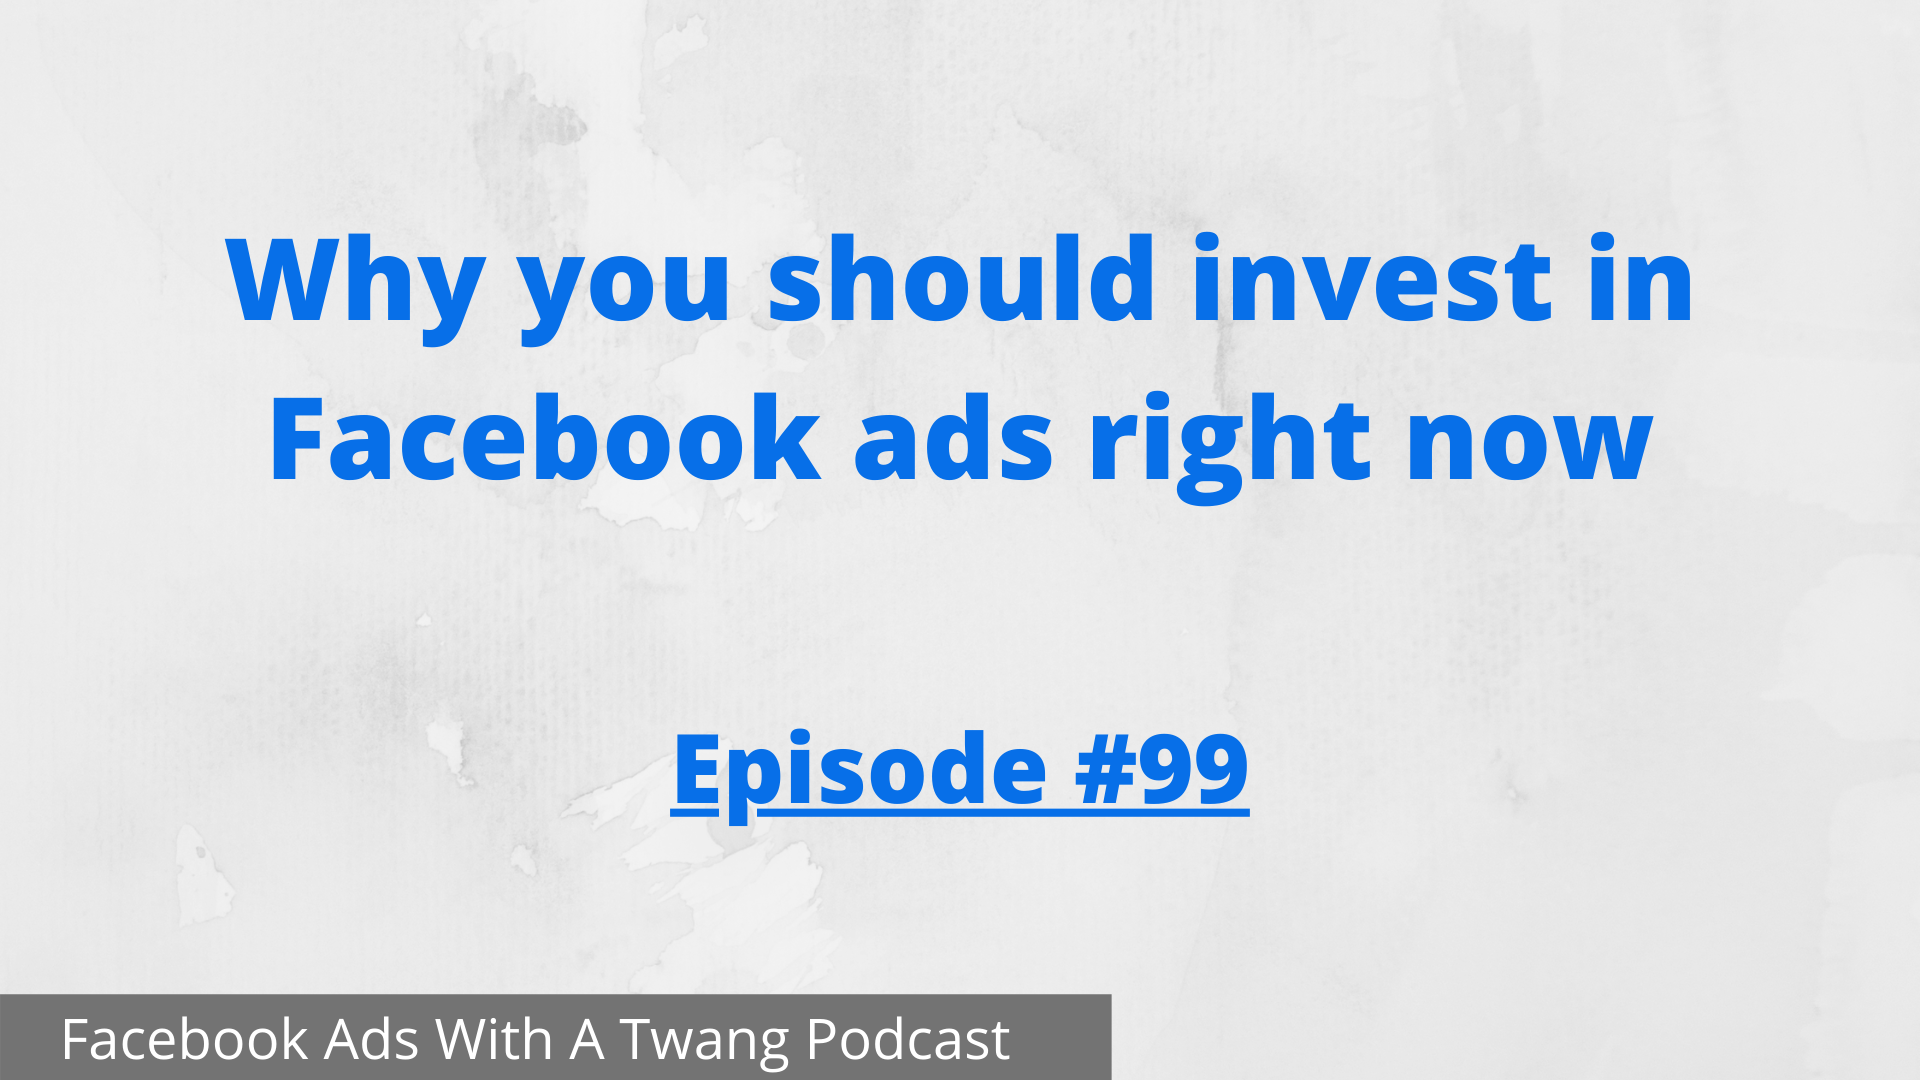 Why you should invest in Facebook ads right now